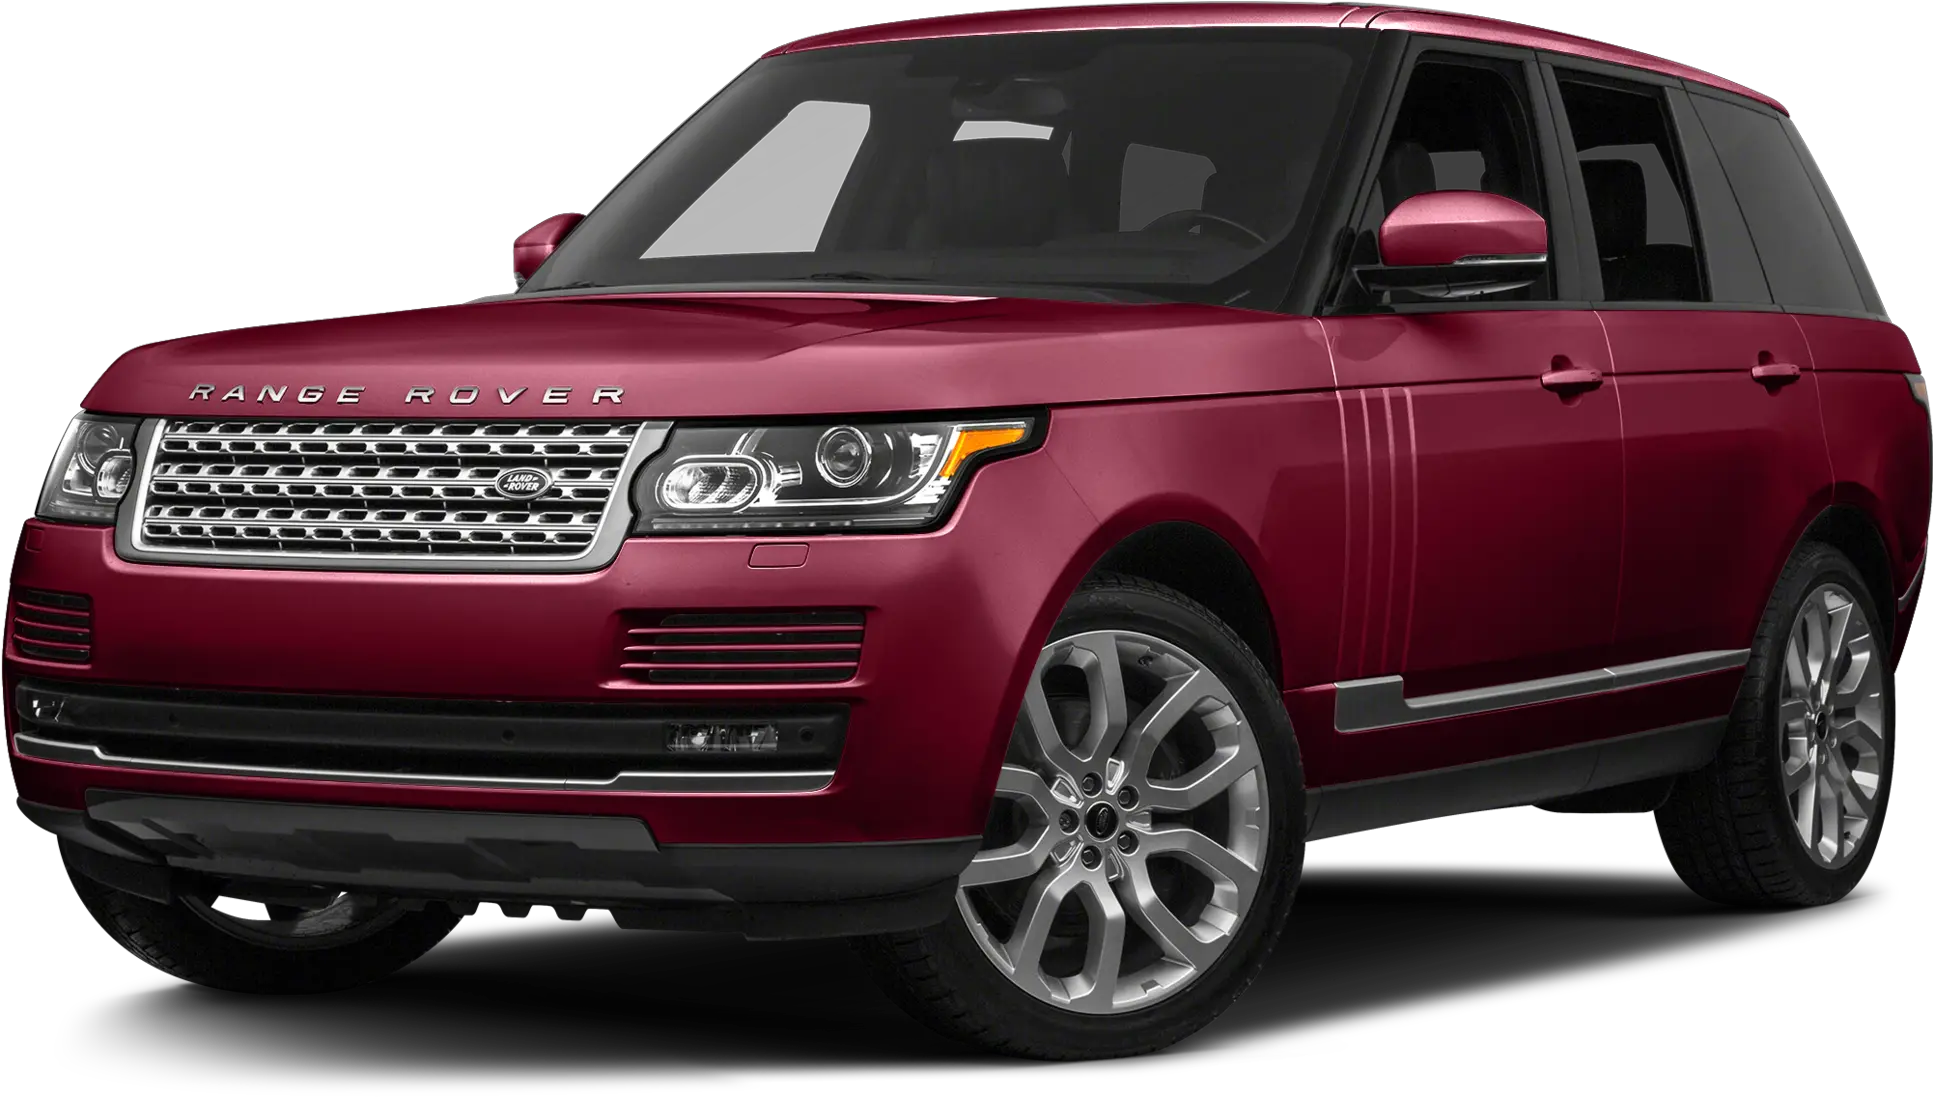 Land Rover Png Images Free Download 2016 Range Rover Range Rover Png